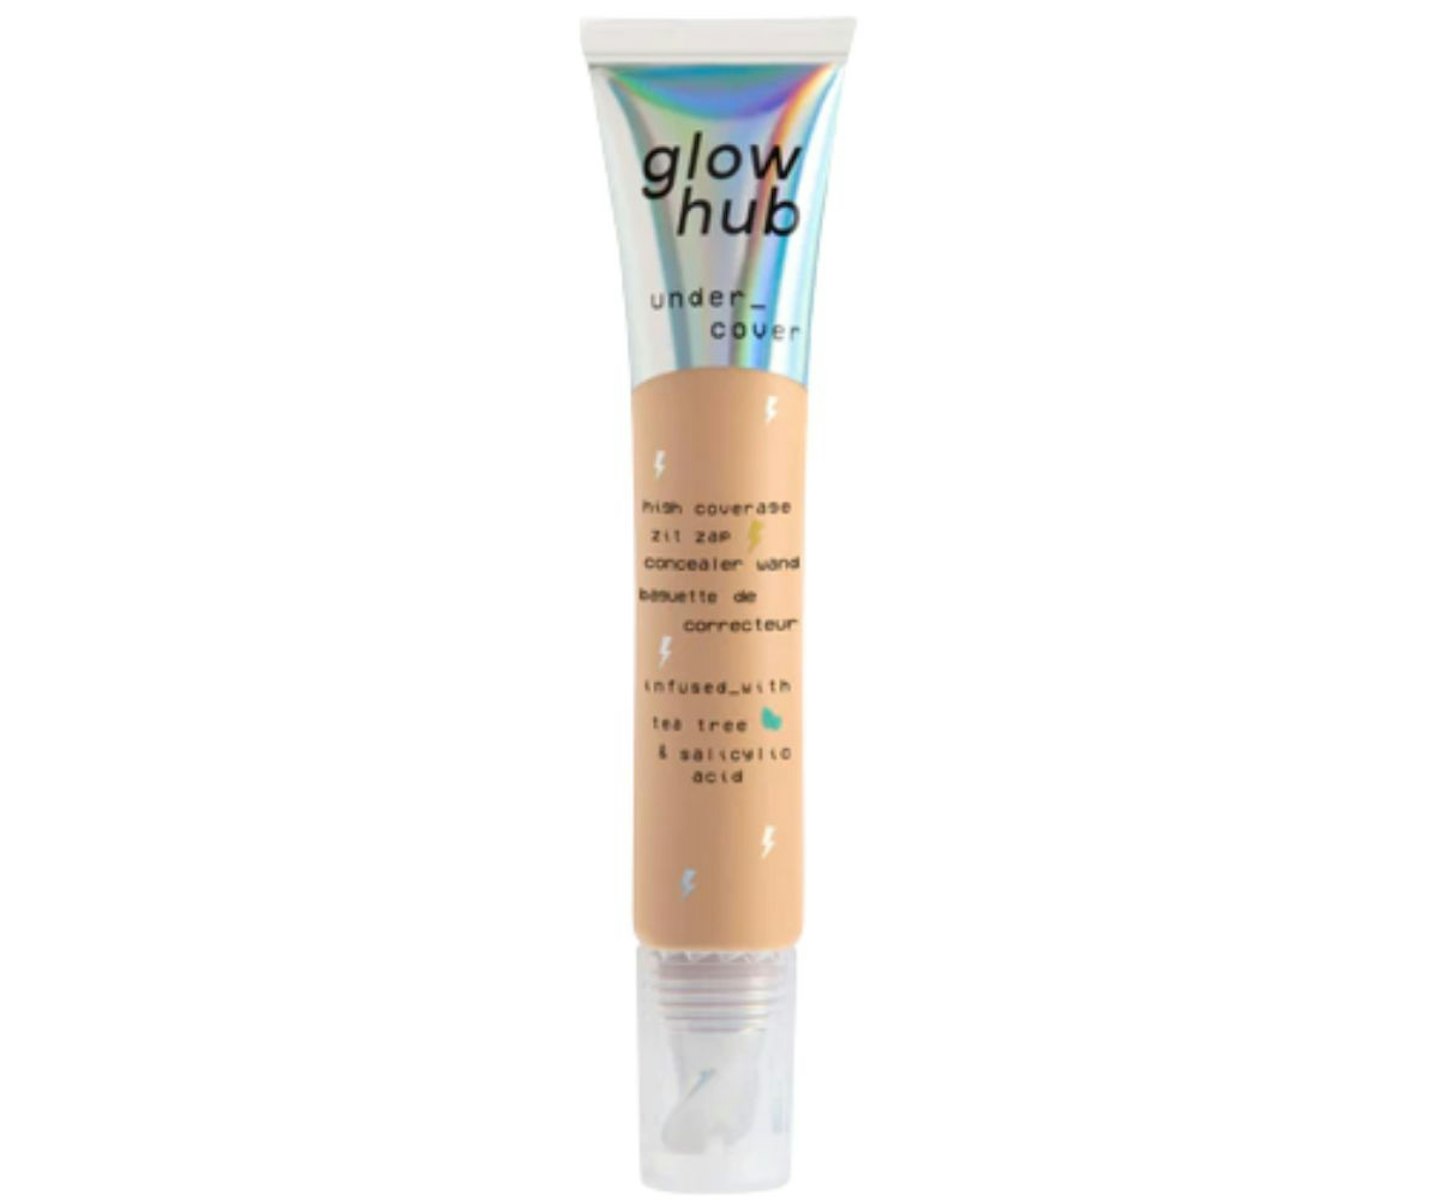 Glow Hub Under Cover_ High Coverage Zit Zap Concealer Wand